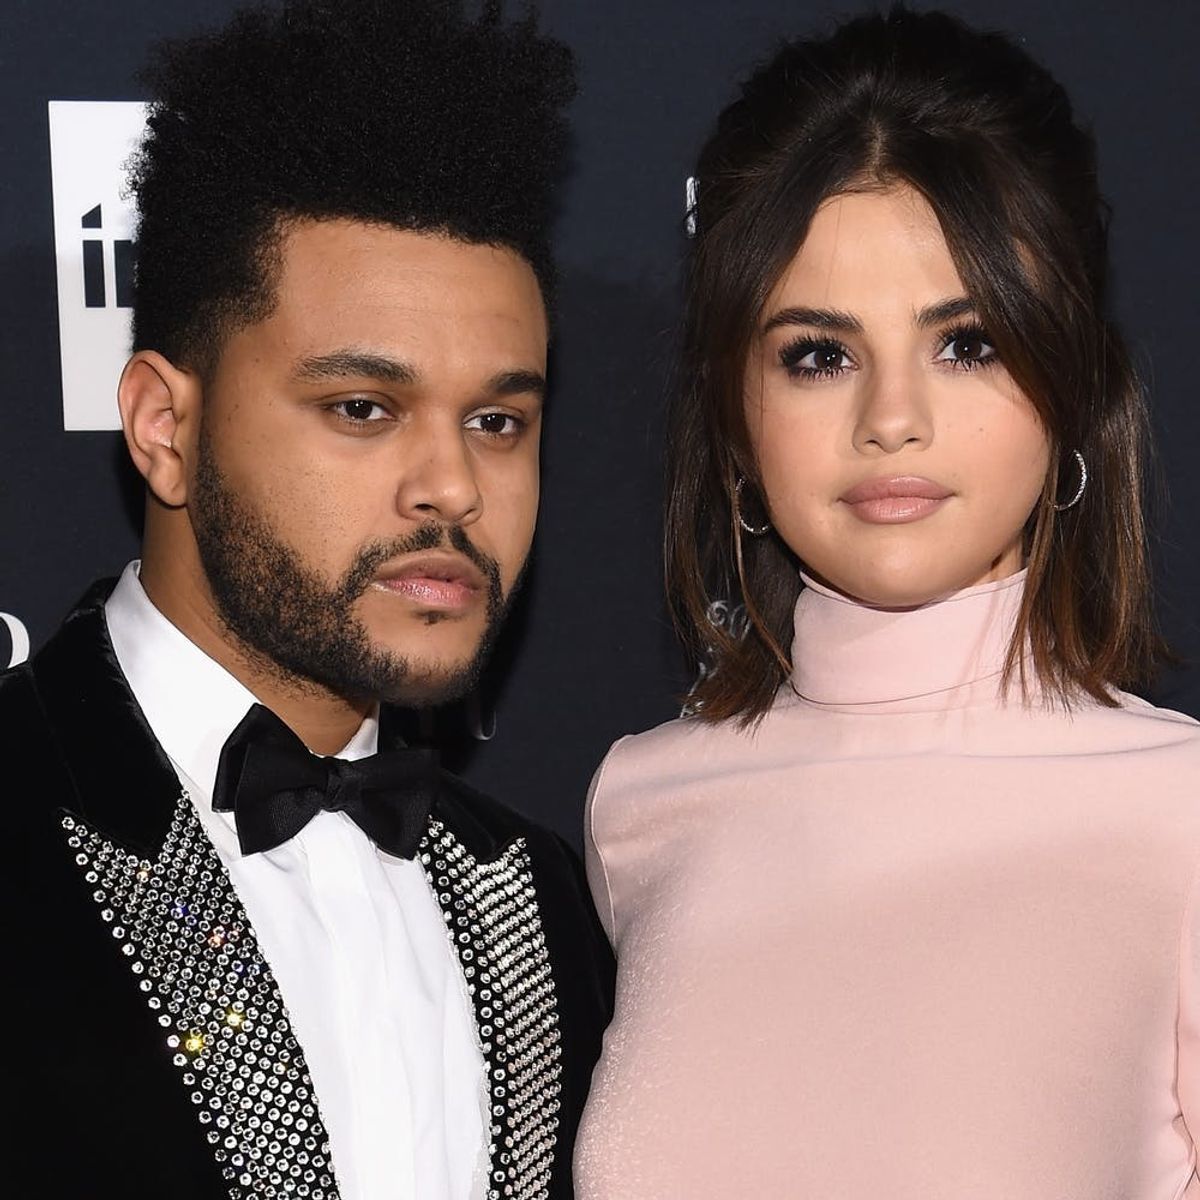 Selena Gomez and The Weeknd Have Reportedly Called It Quits